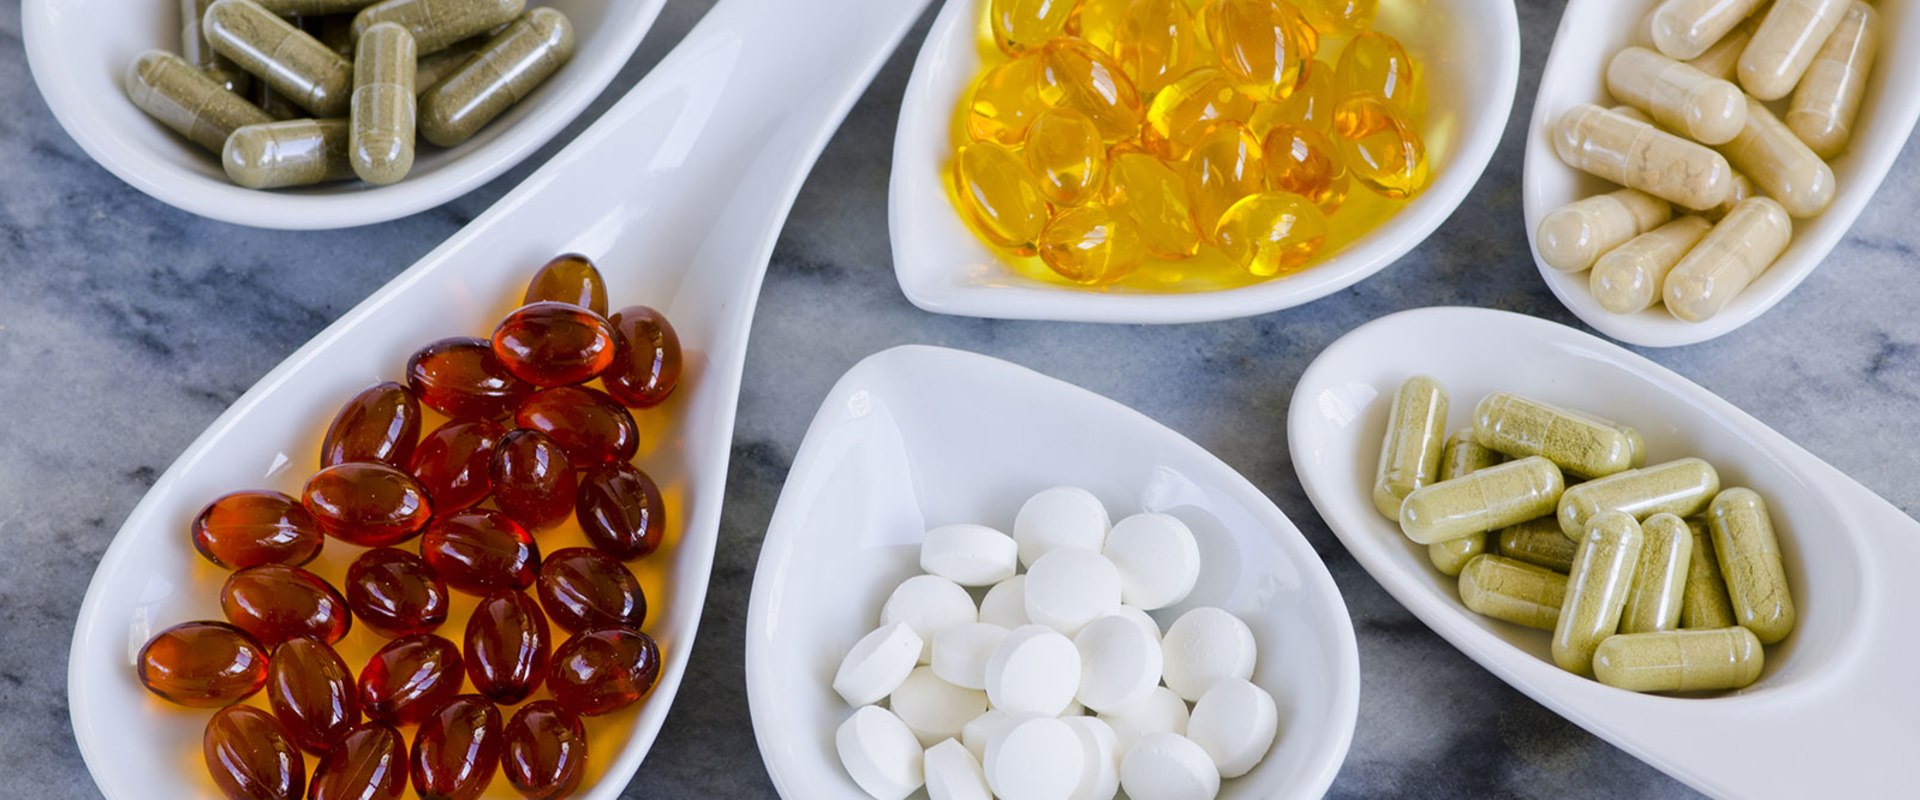 Vitamins and Supplements: Foods to Avoid and How to Maximize Their Benefits